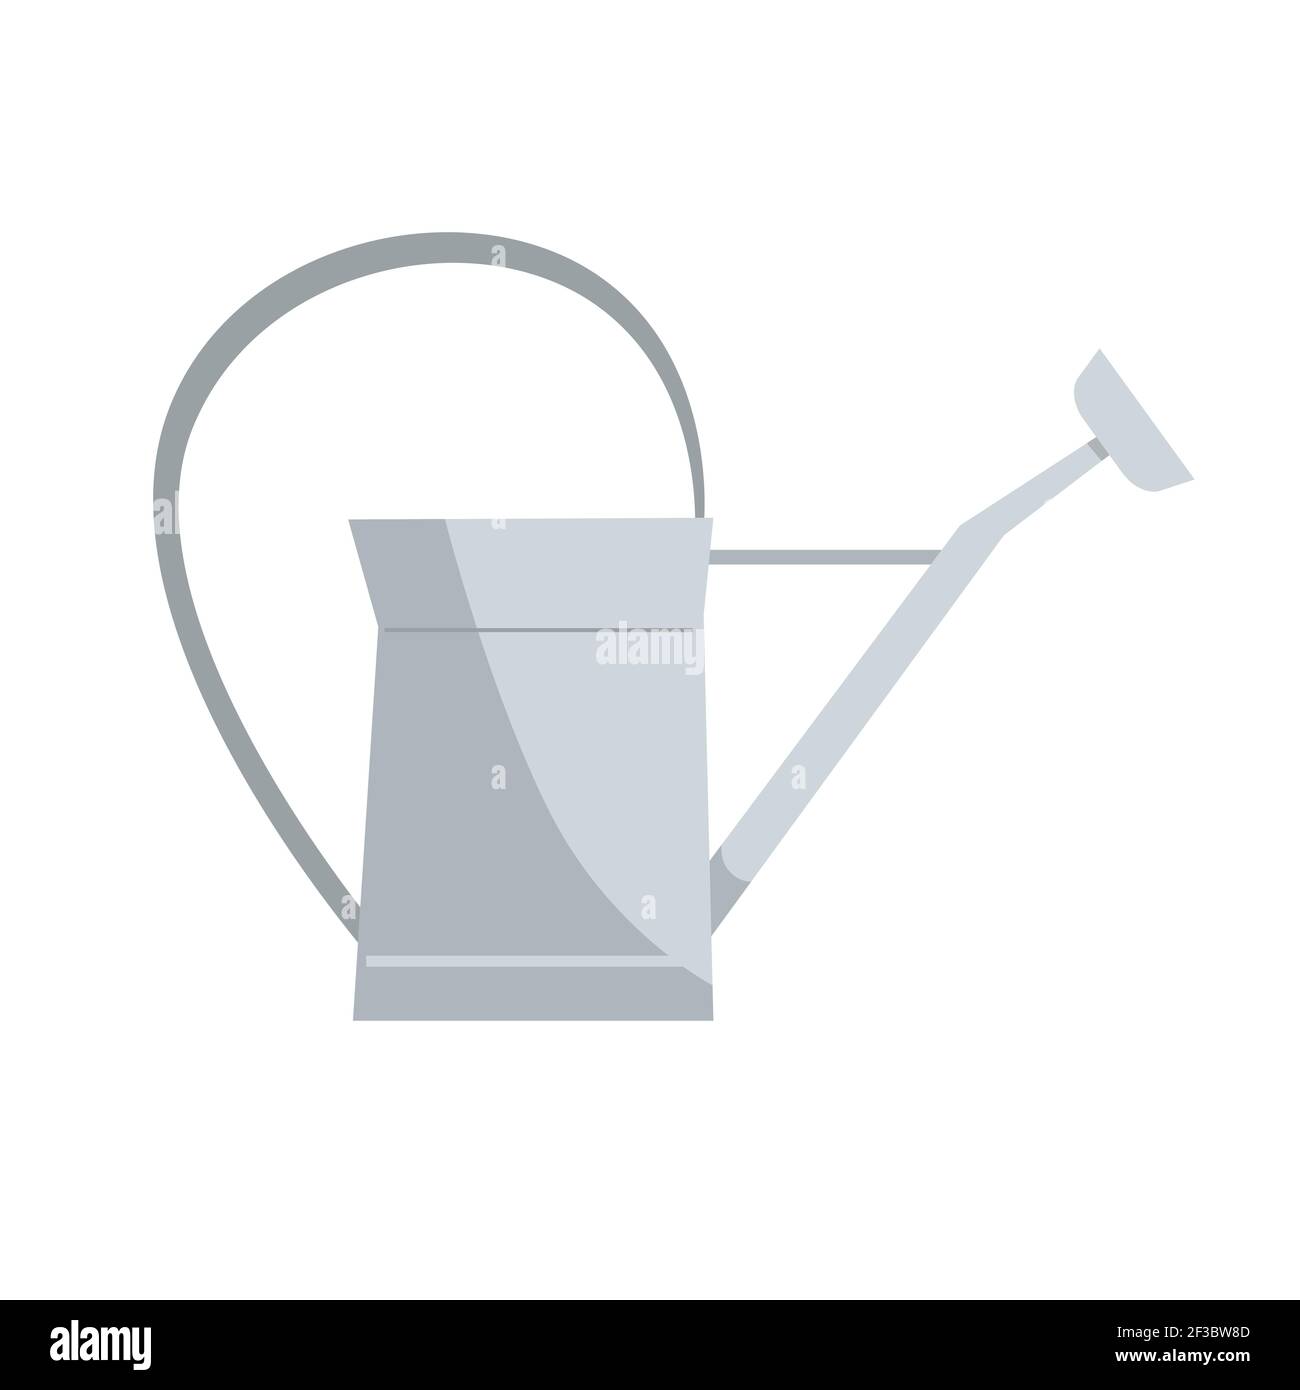 Vintage metal watering can, a classic design. Gardening tool or rustic decoration element. Vector illustration isolated on a white background Stock Vector